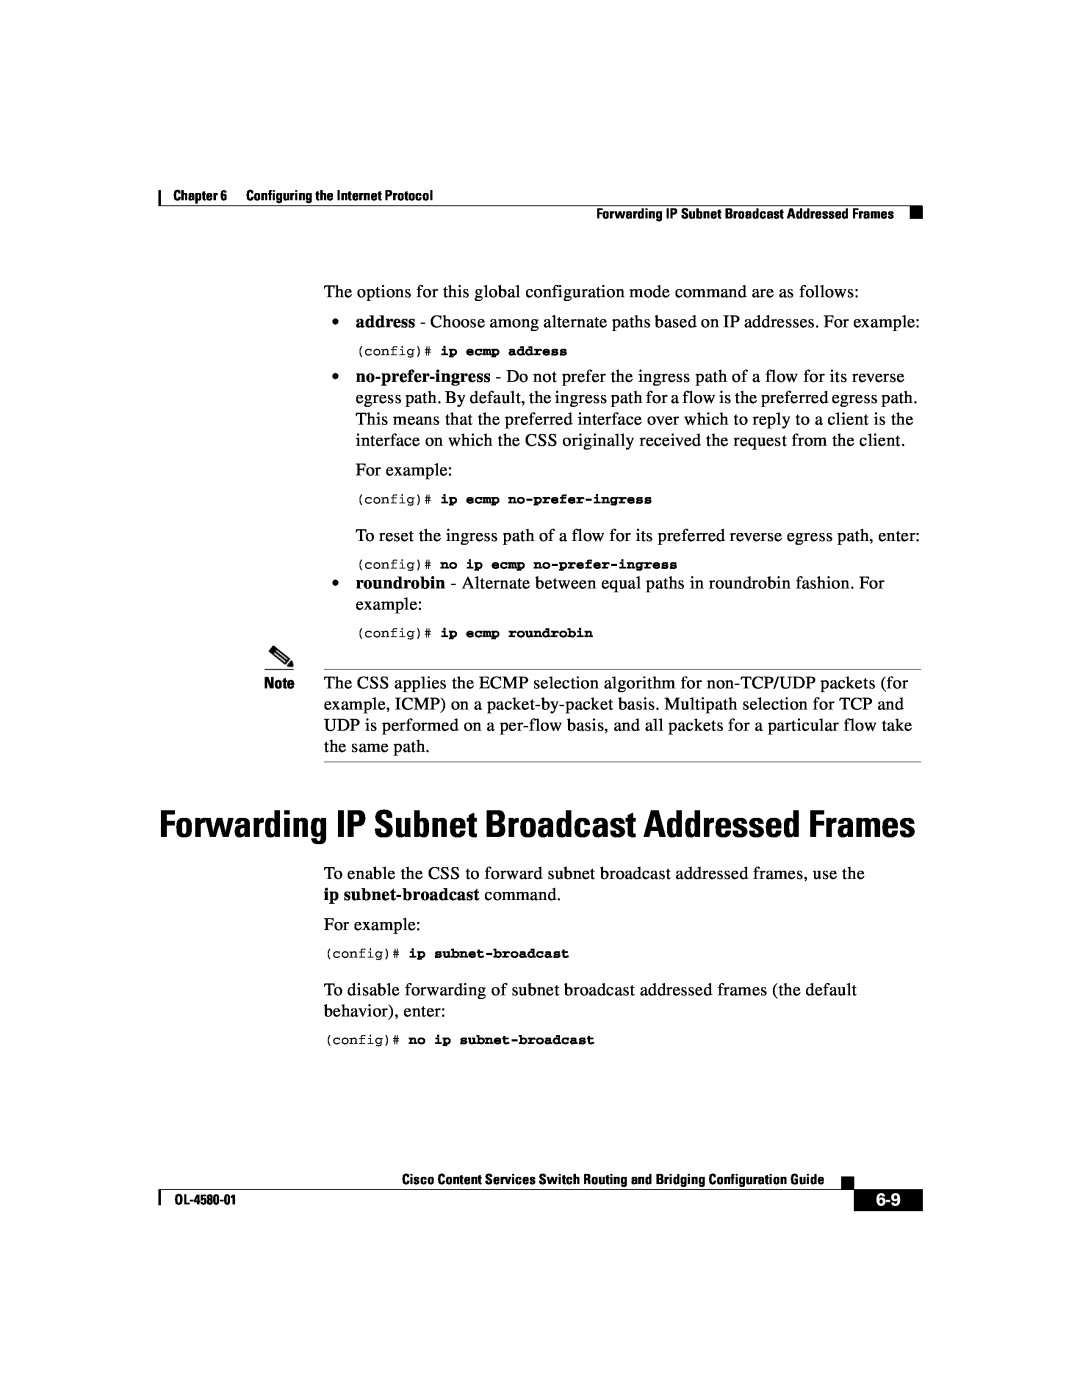 Cisco Systems OL-4580-01 manual Forwarding IP Subnet Broadcast Addressed Frames, ip subnet-broadcast command 